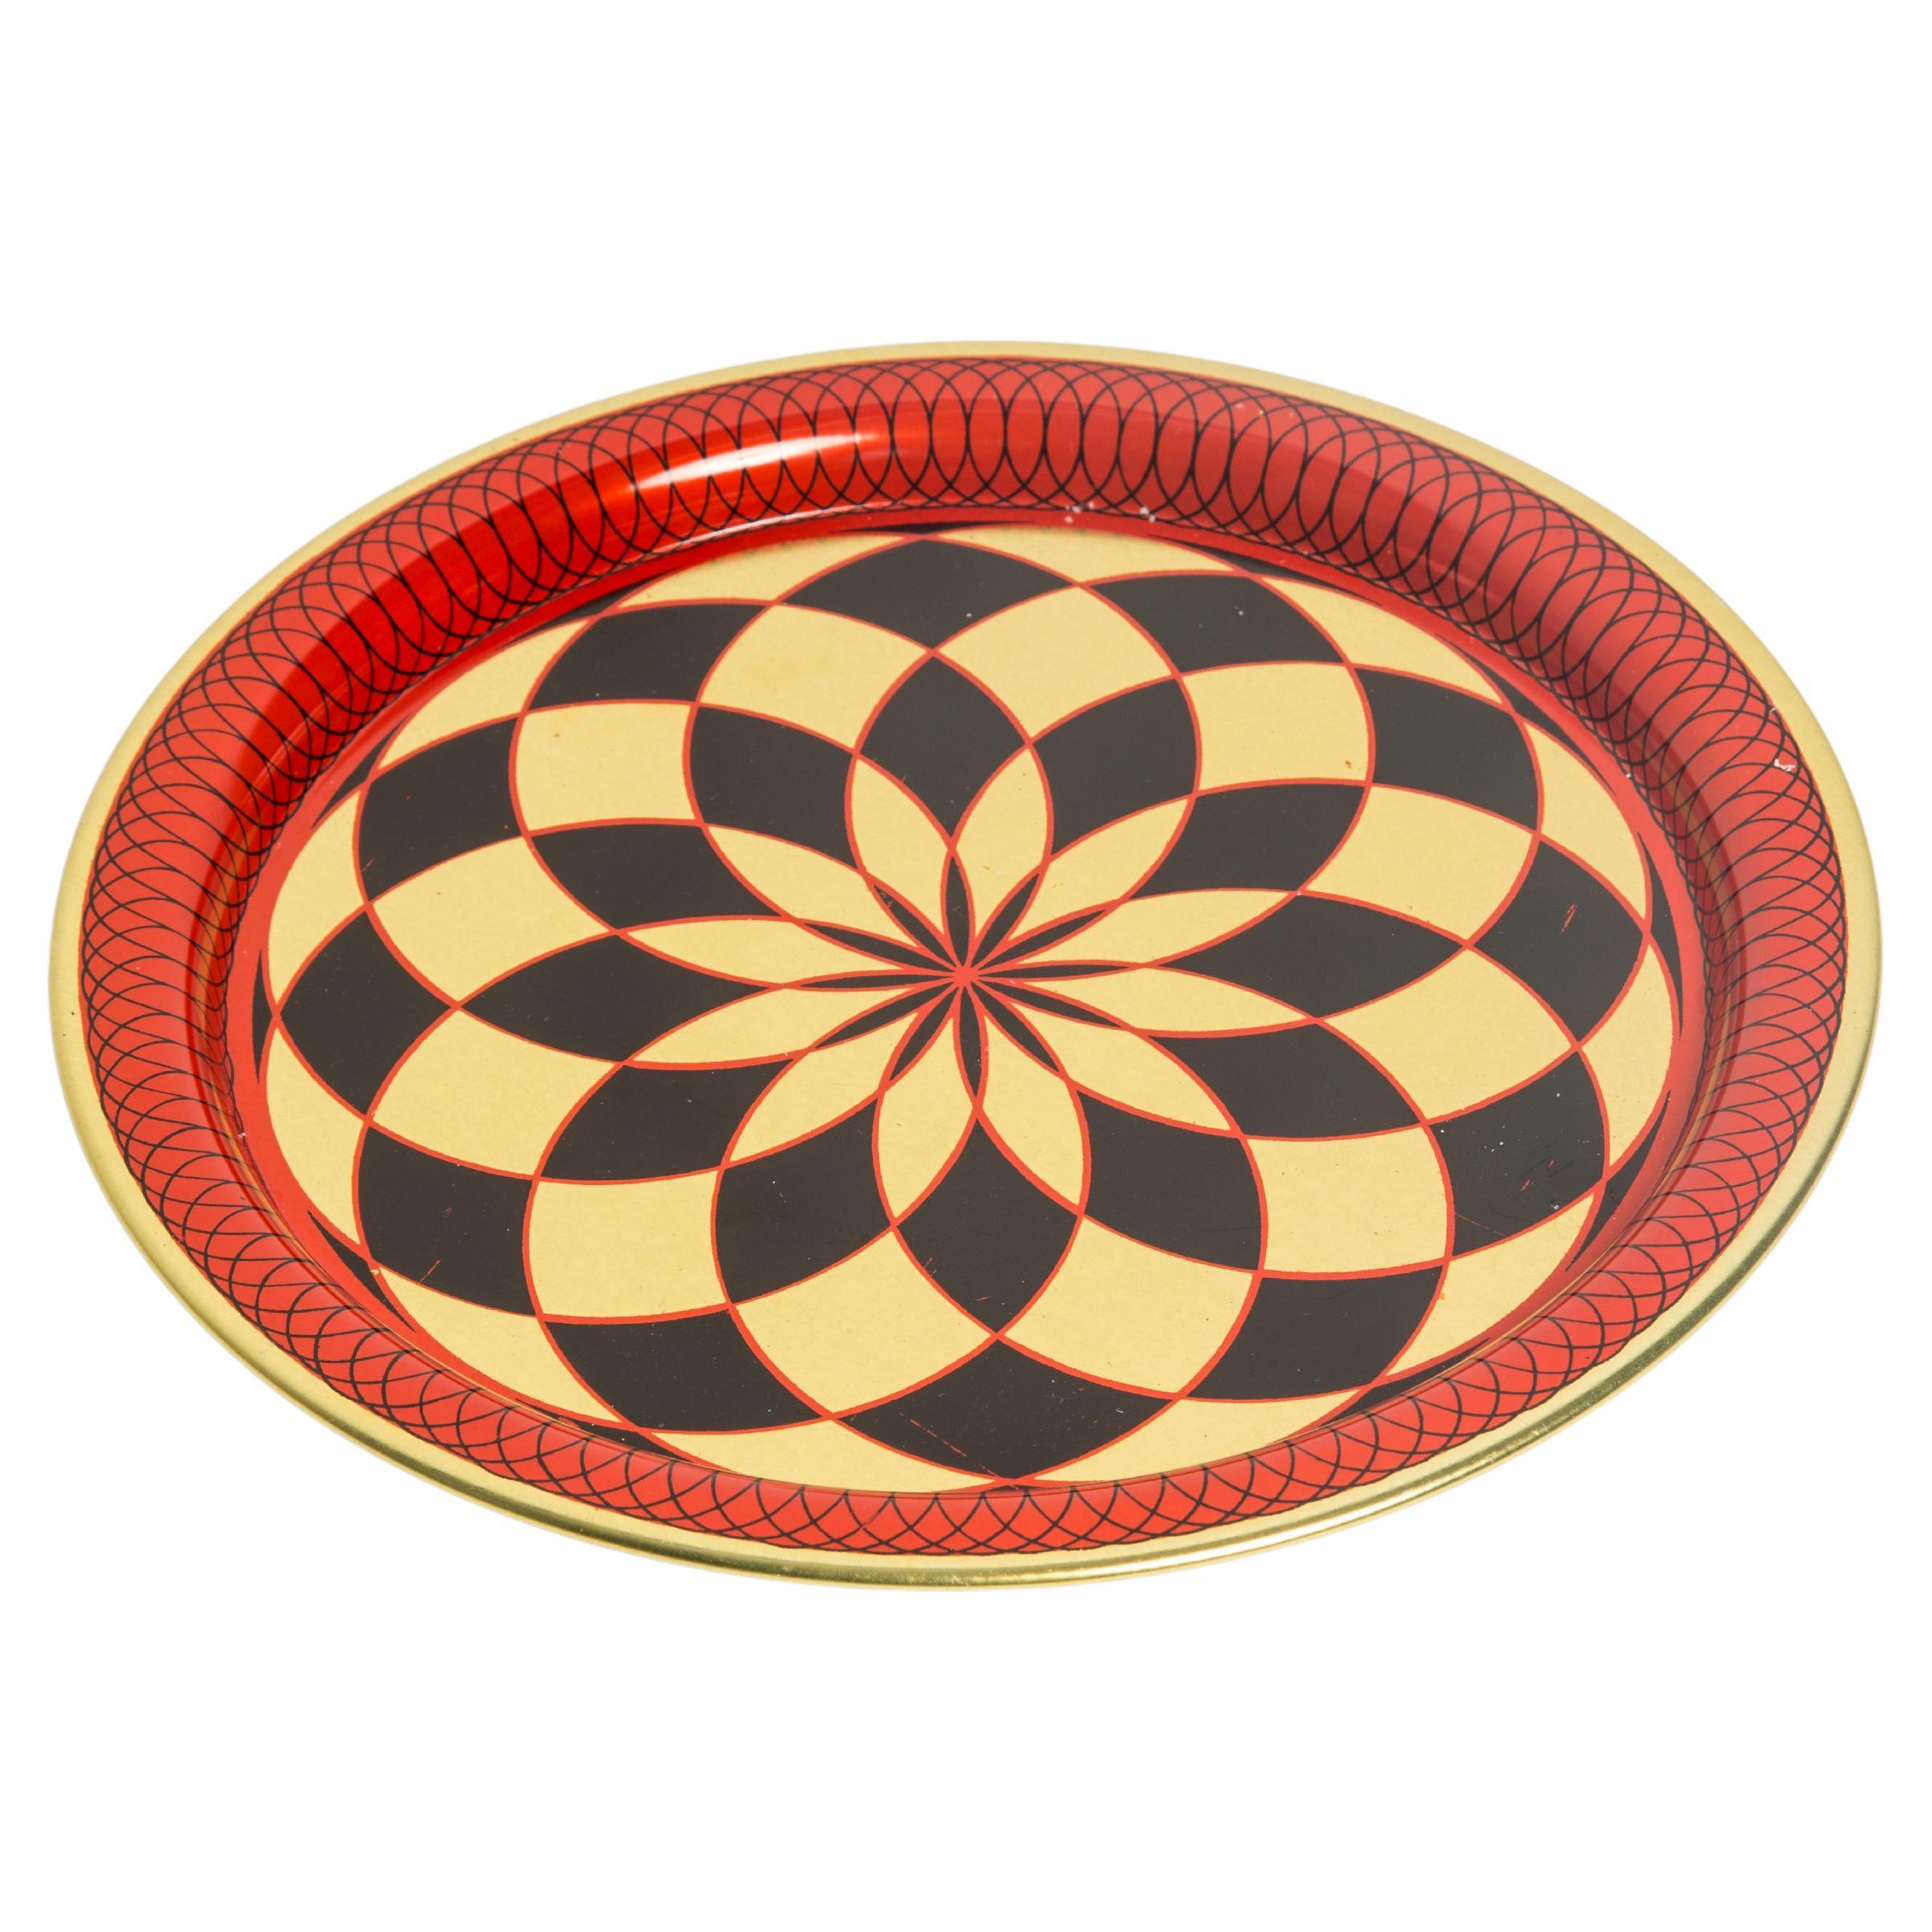 Midcentury Vintage Red Black and Gold Decorative Metal Plate, Poland, 1960s For Sale